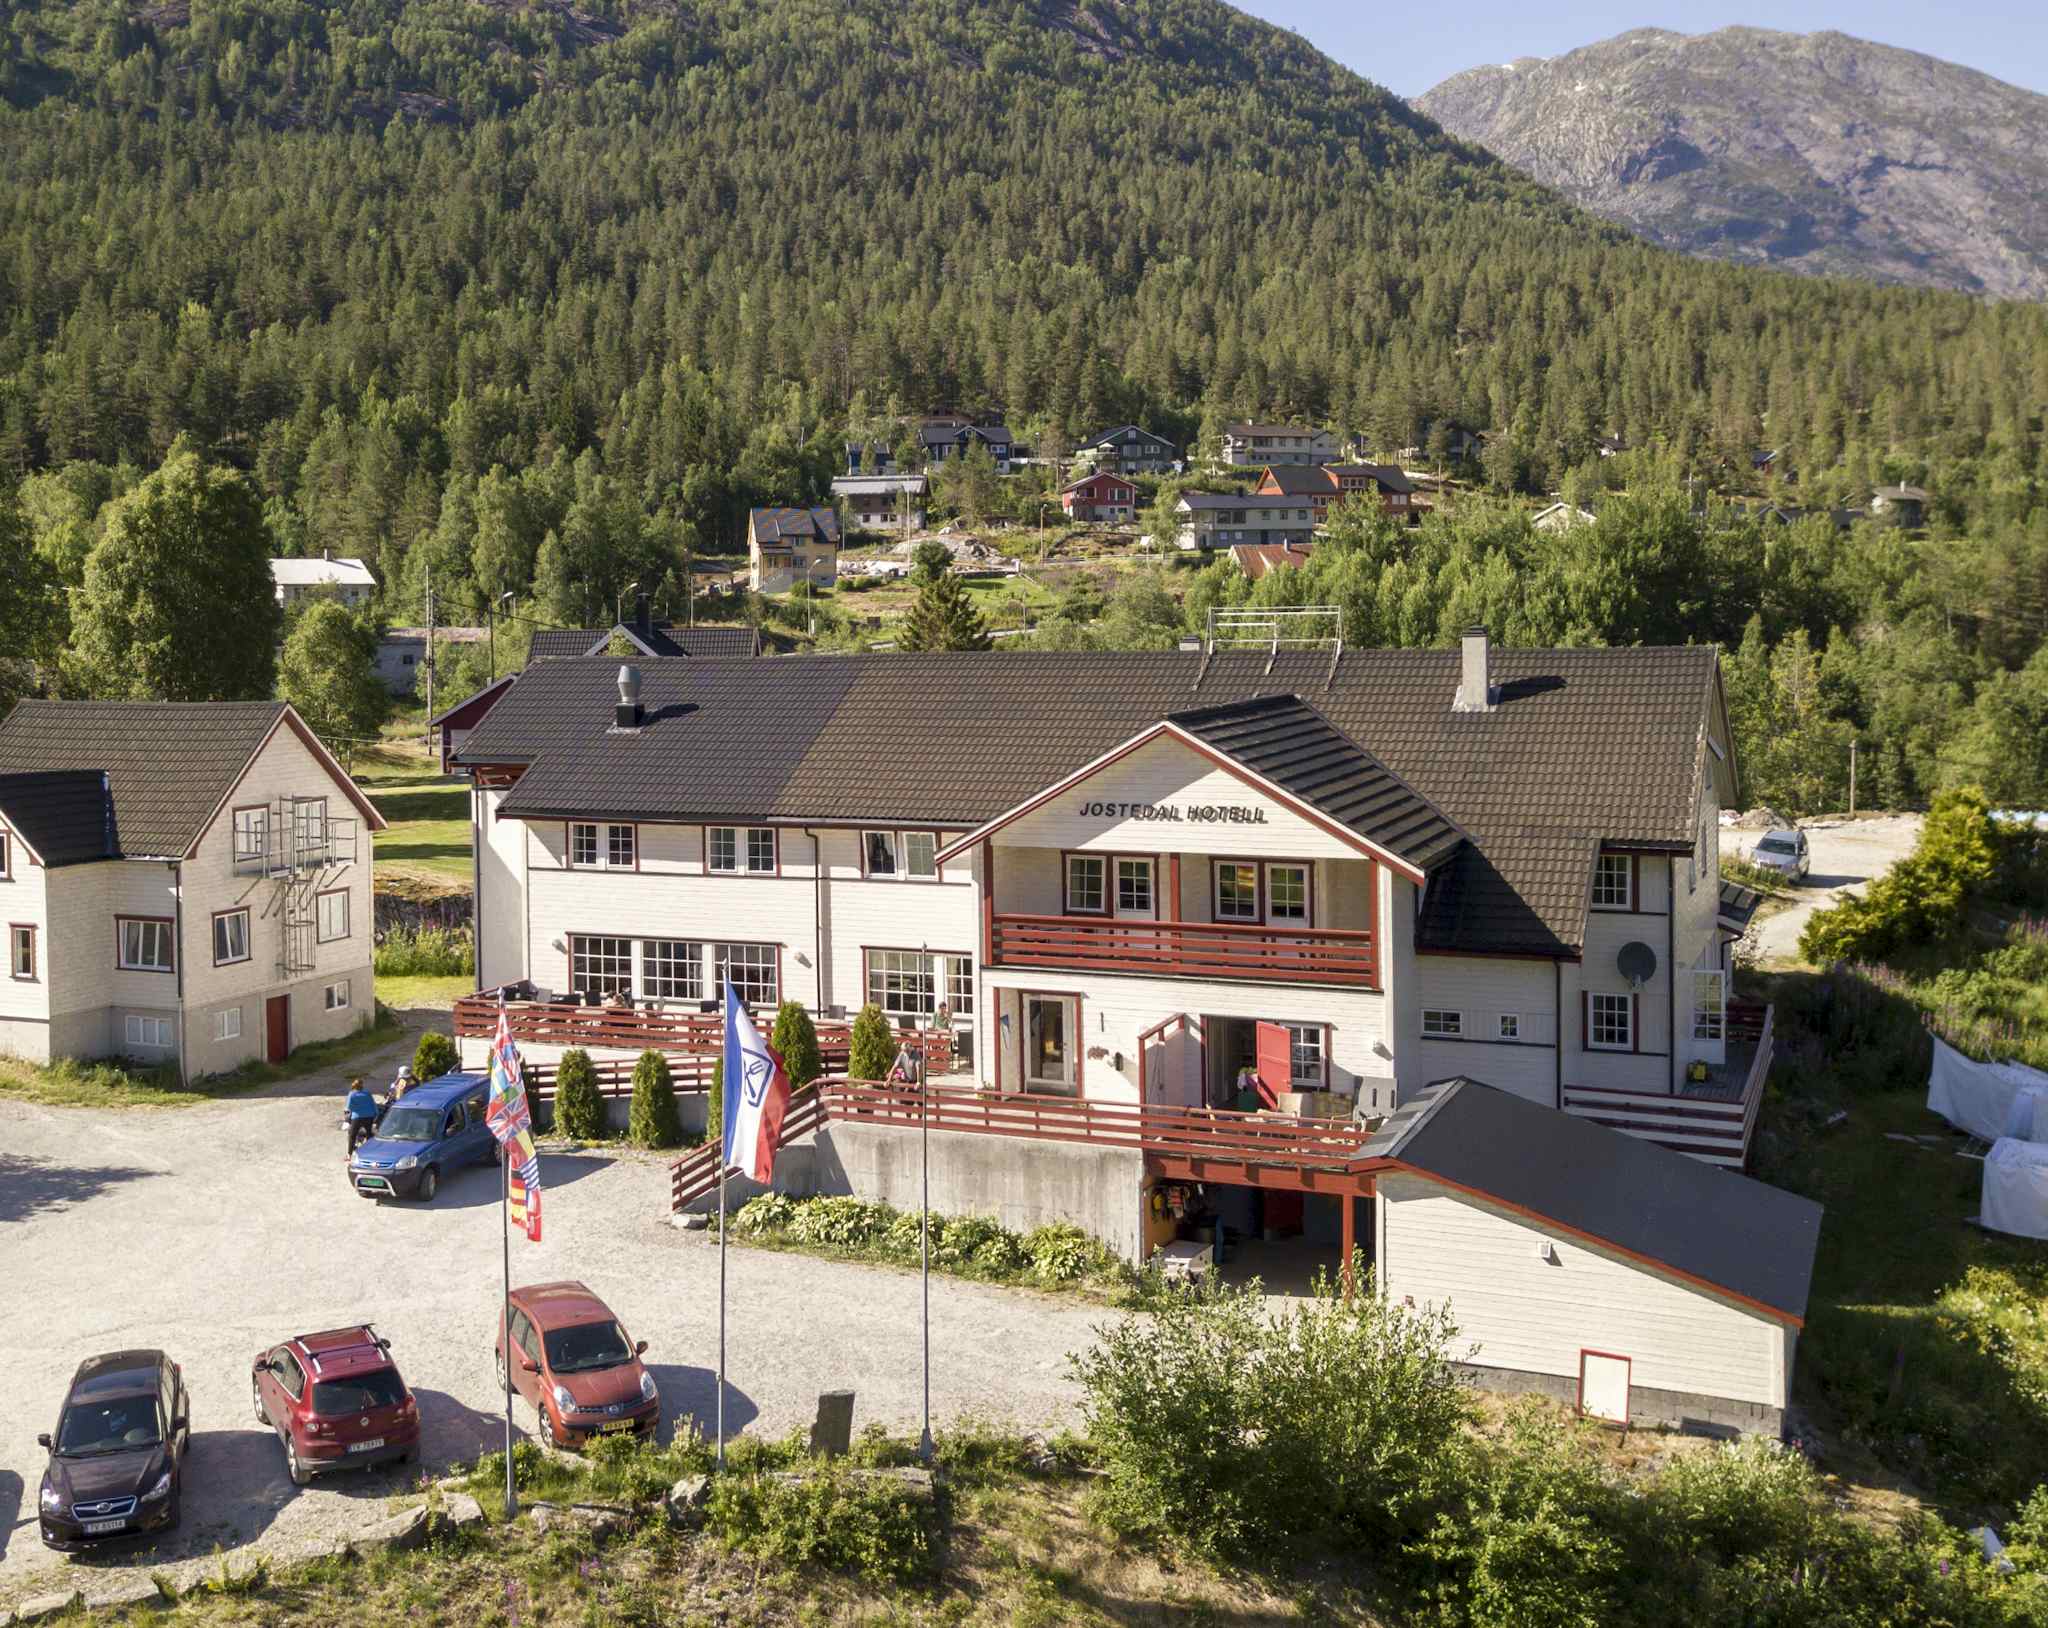 The Jostedal Hotel in the Jostedalsbreen Glacier National Park, Norway. 